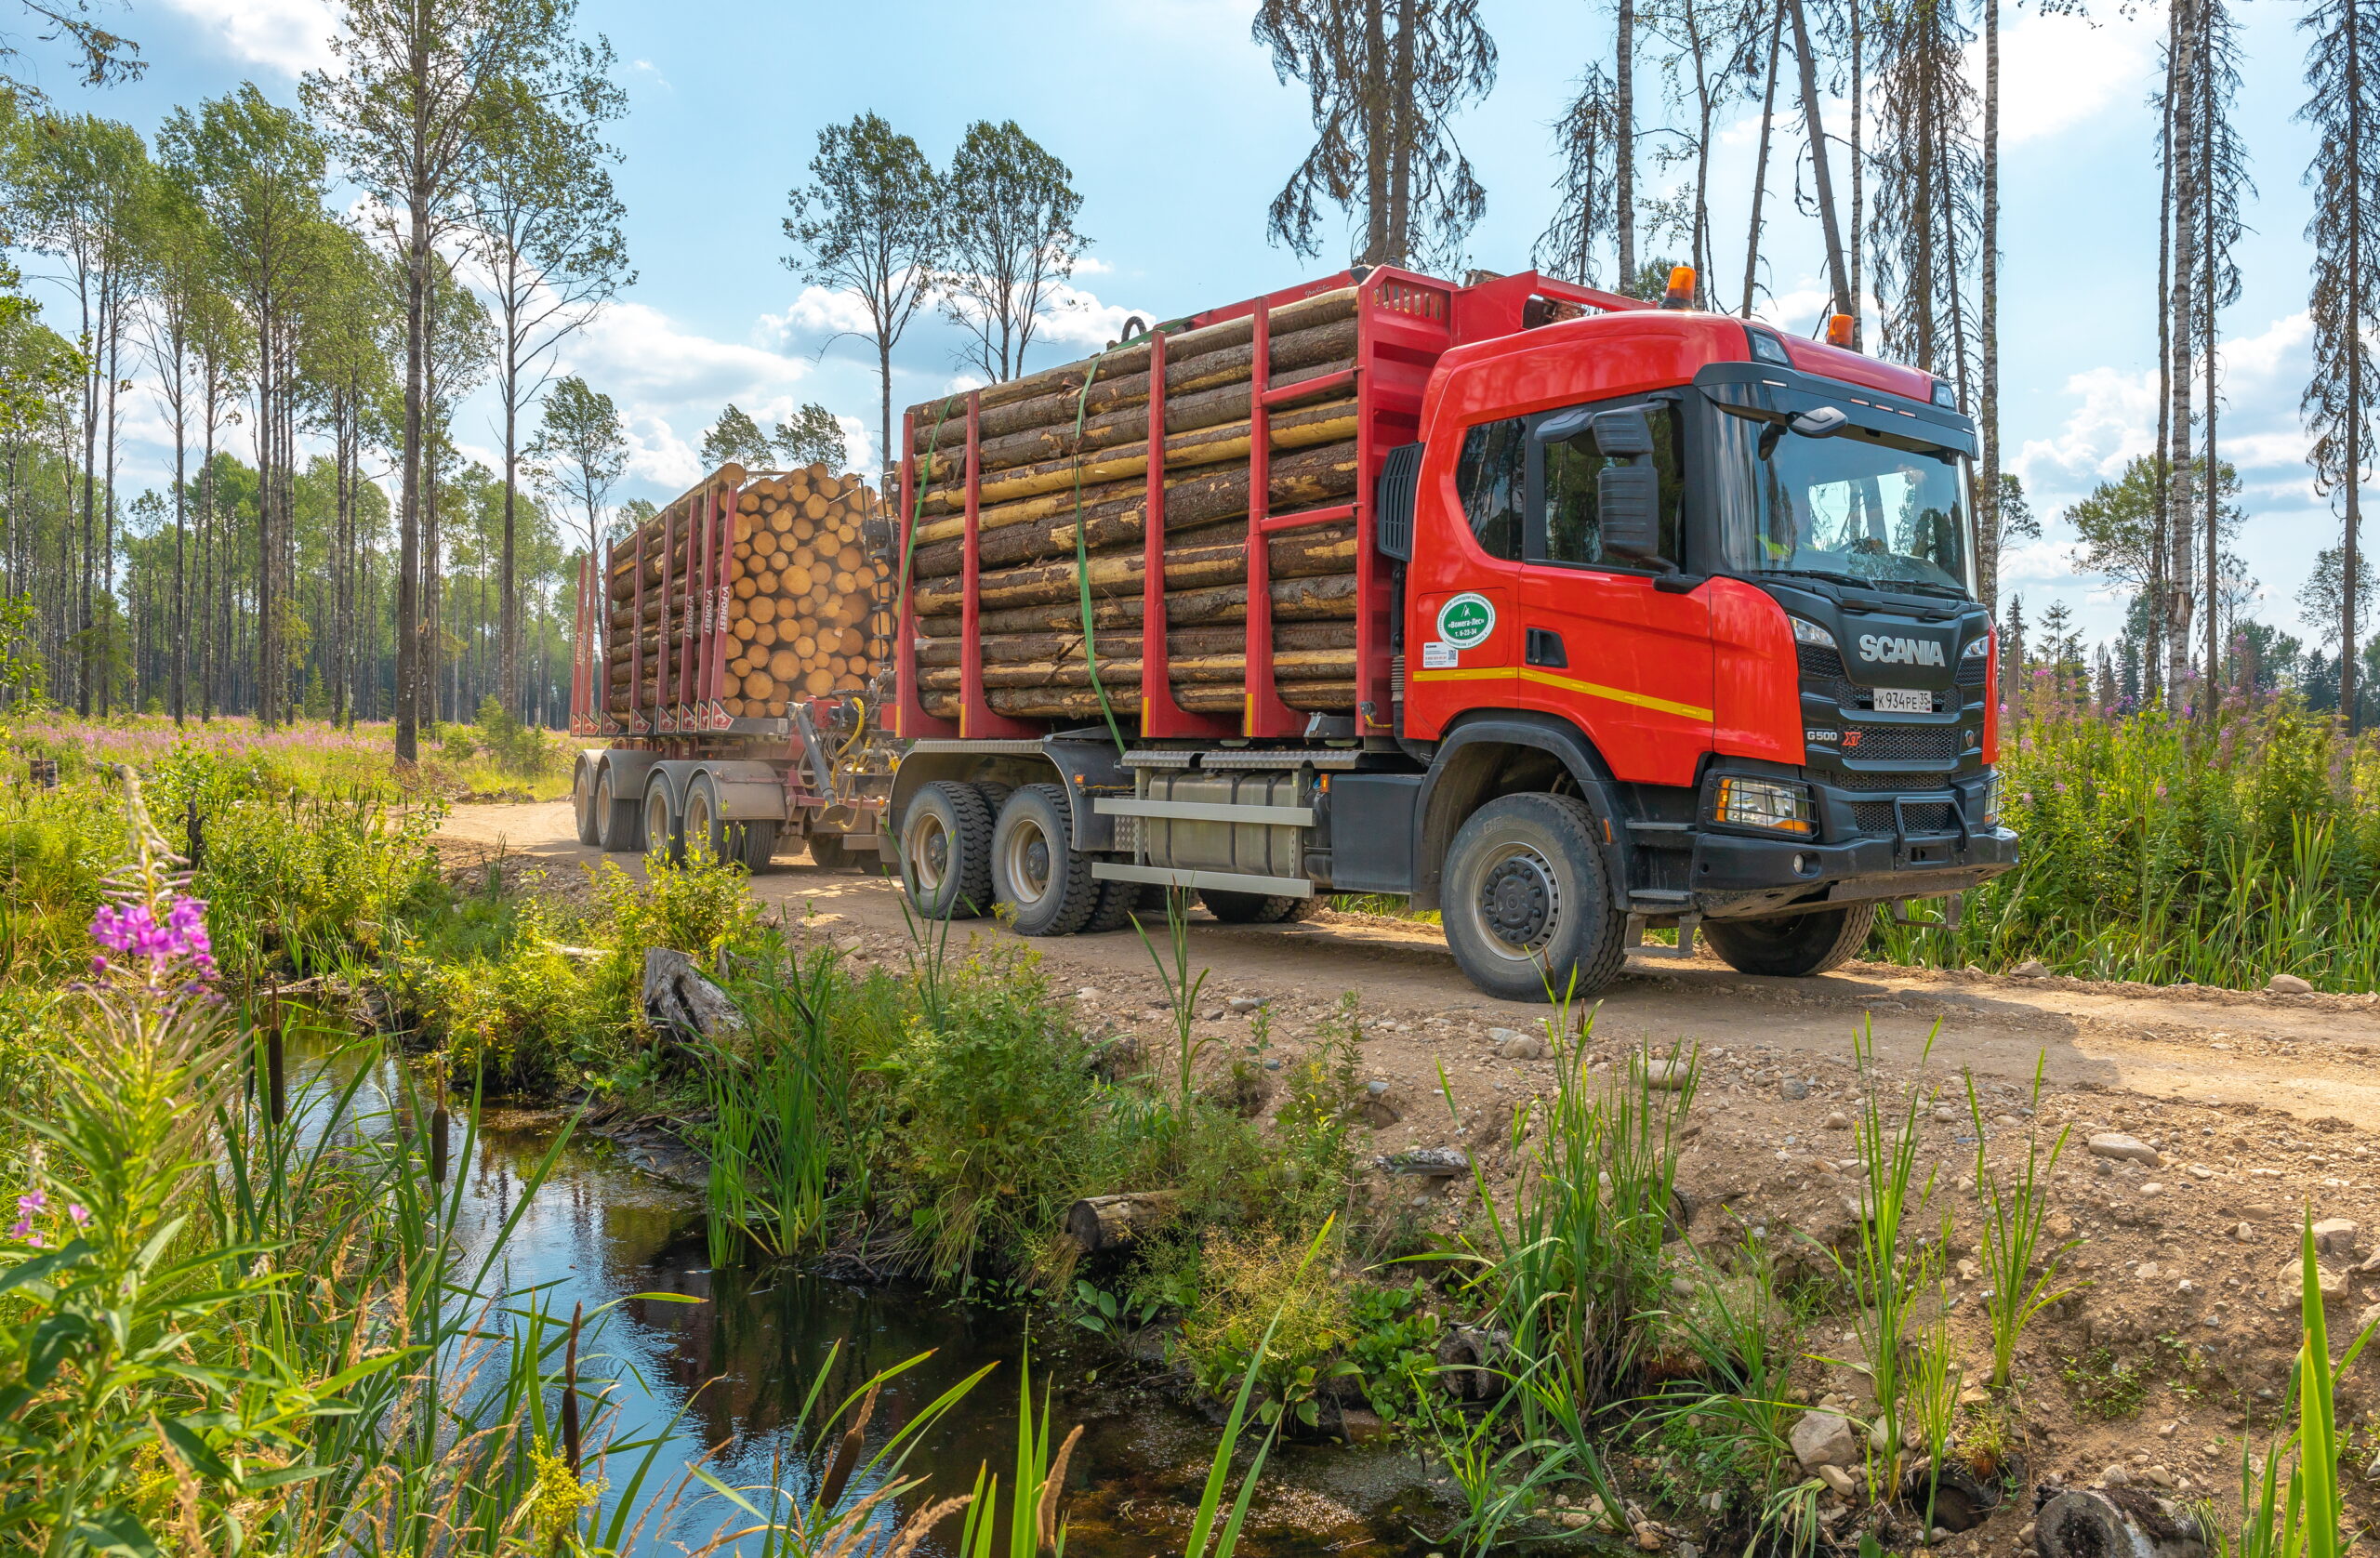 “Vologda timber industrialists” entered the top 10 largest timber companies in Russia according to the magazine “Forest Industry”